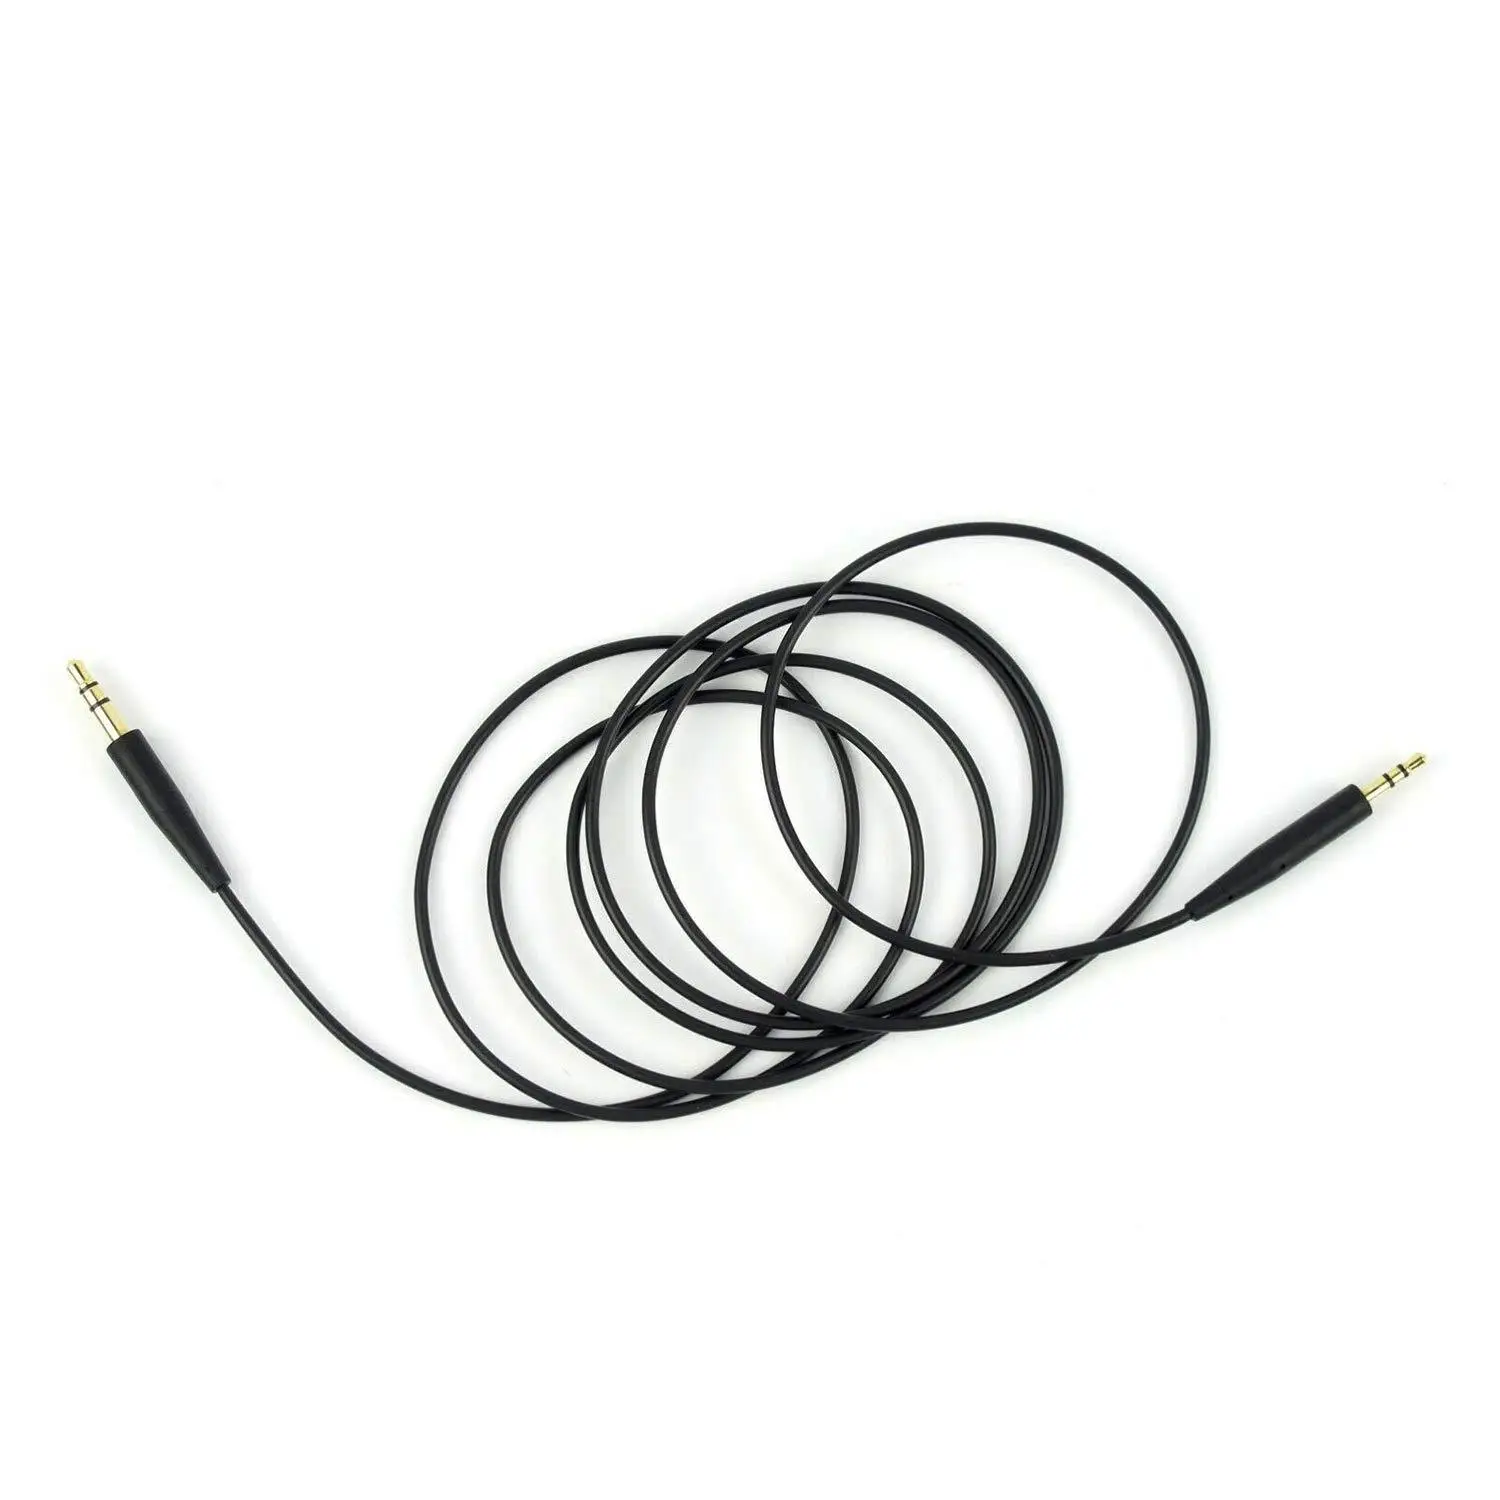 

Audio Cable For Bose Quiet Comfort QC35 25 QC25 SoundTrue OE2 OE2i AE2 AE2i Headphones 2.5mm to 3.5mm 5.5ft/1.4M